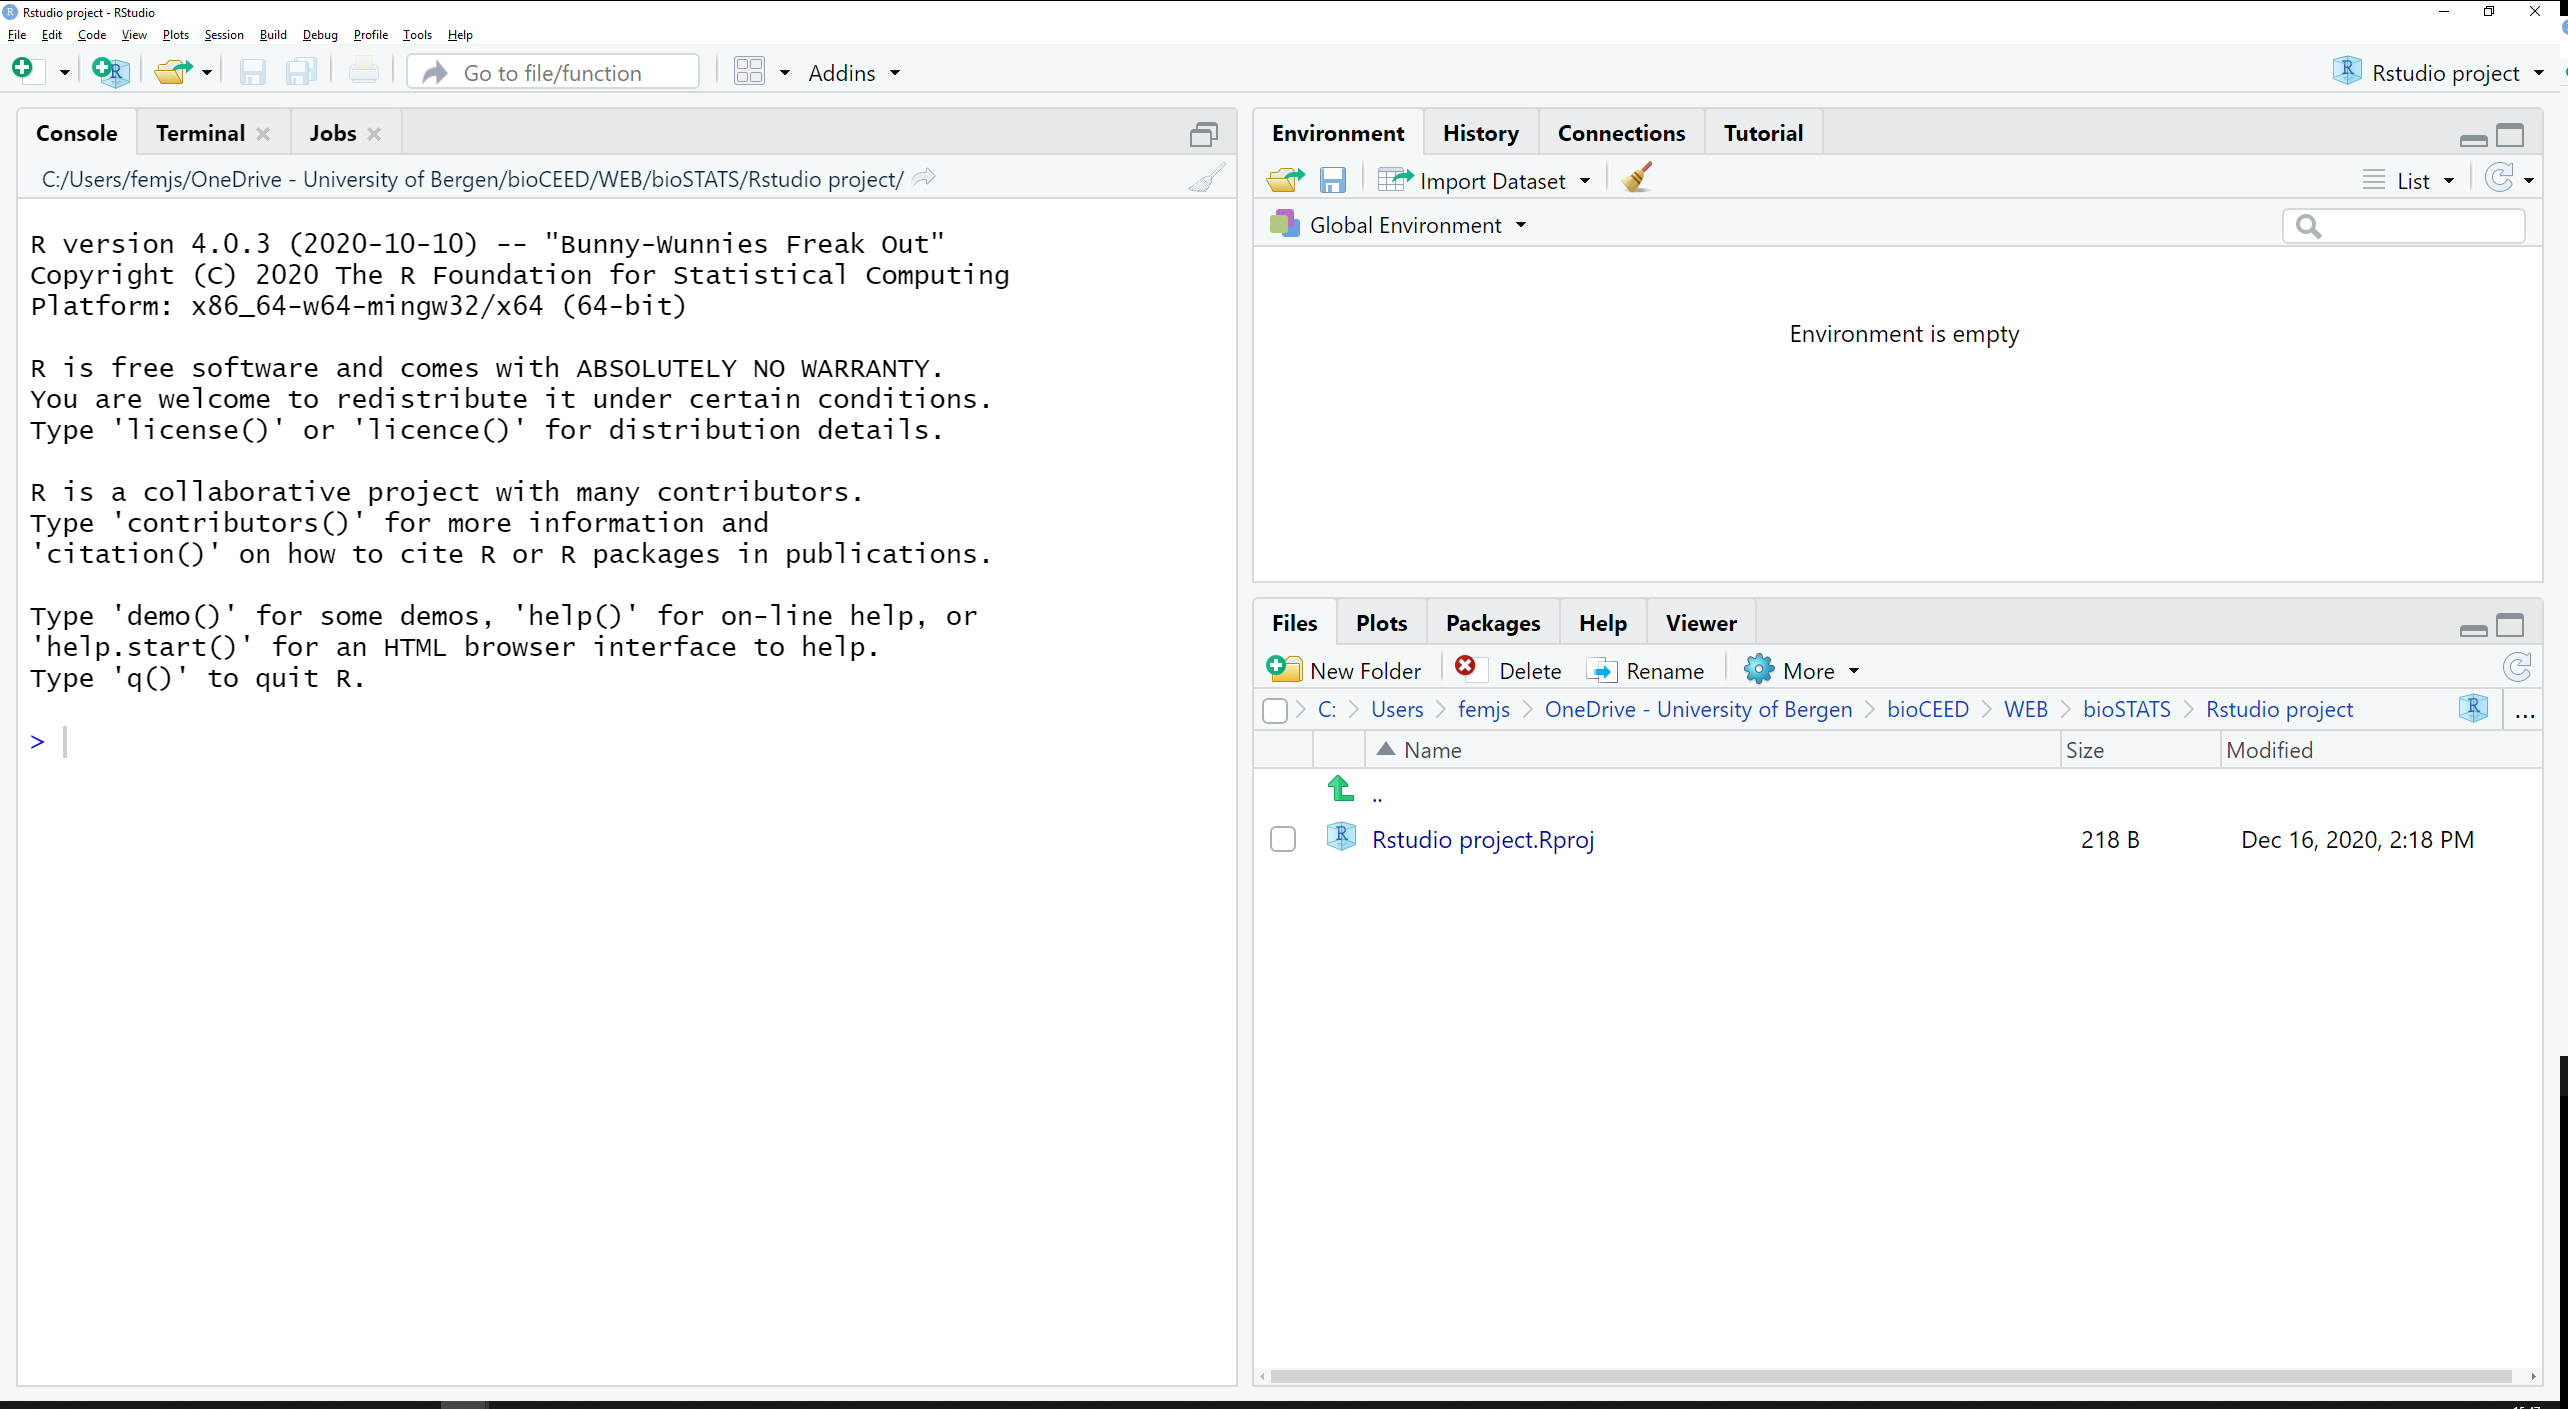 Screenshot showing how RStudio looks when it is first opened